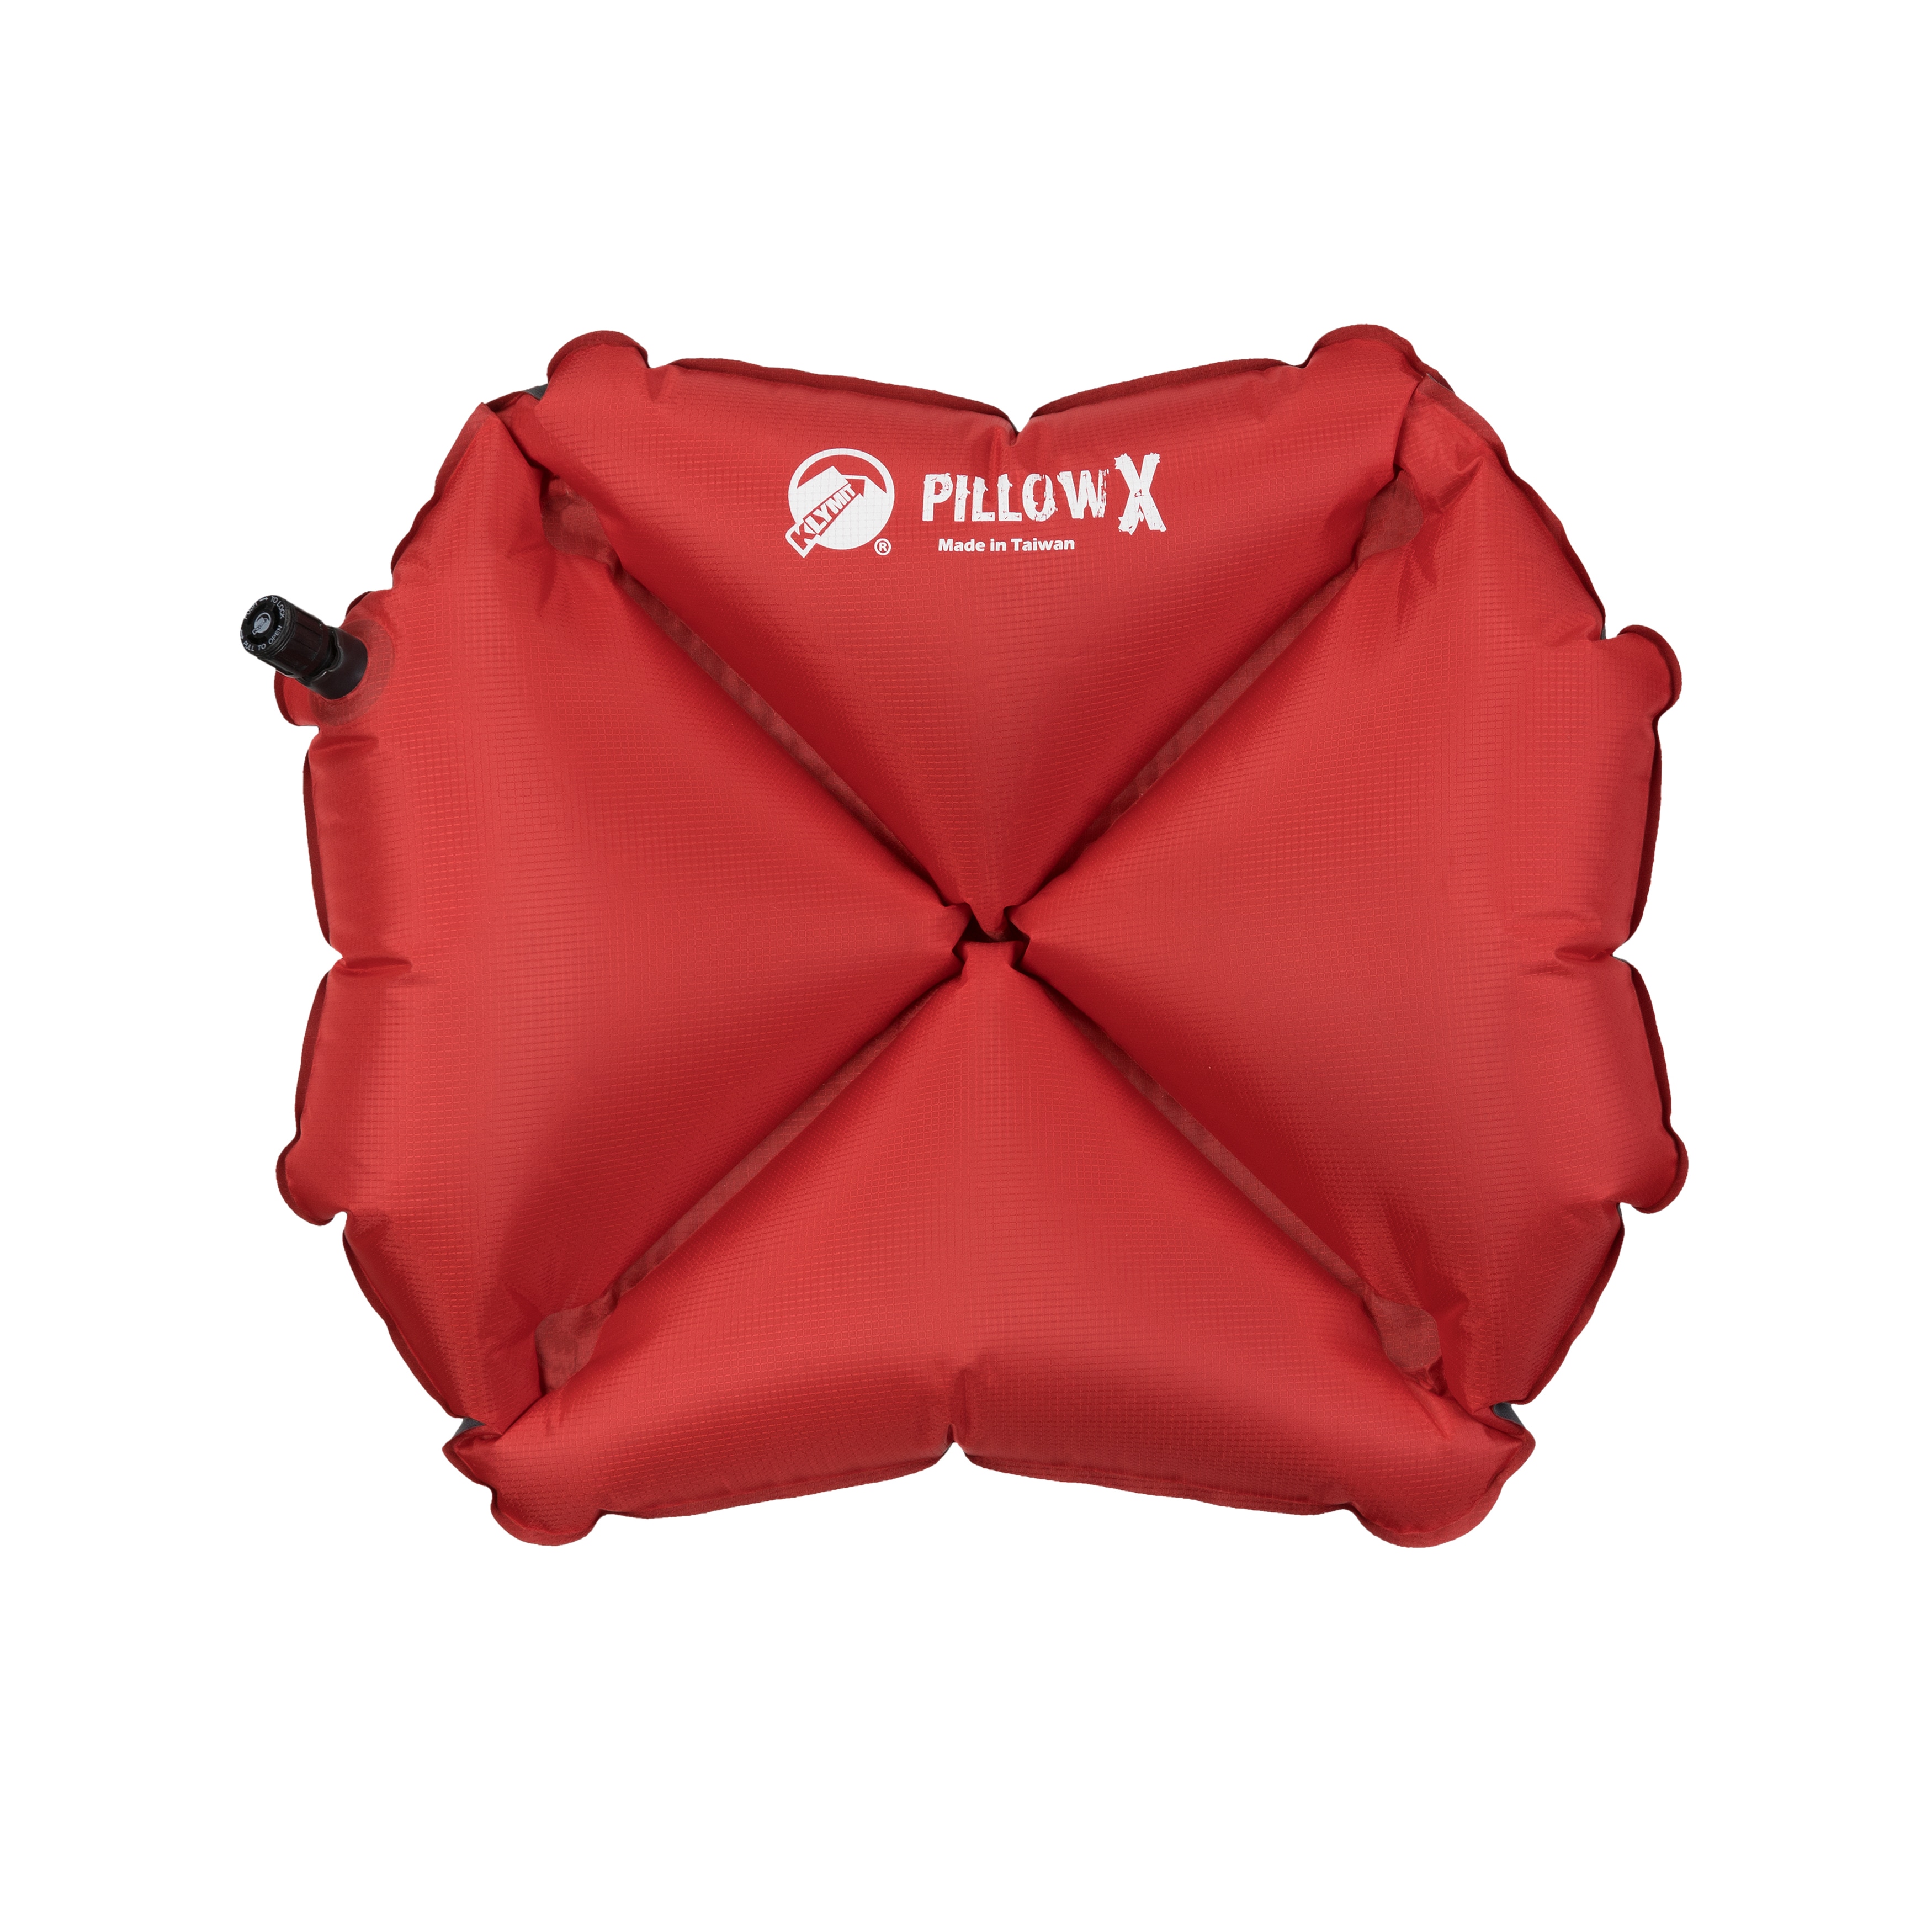 Klymit Red/ Grey X inflatable Pillow